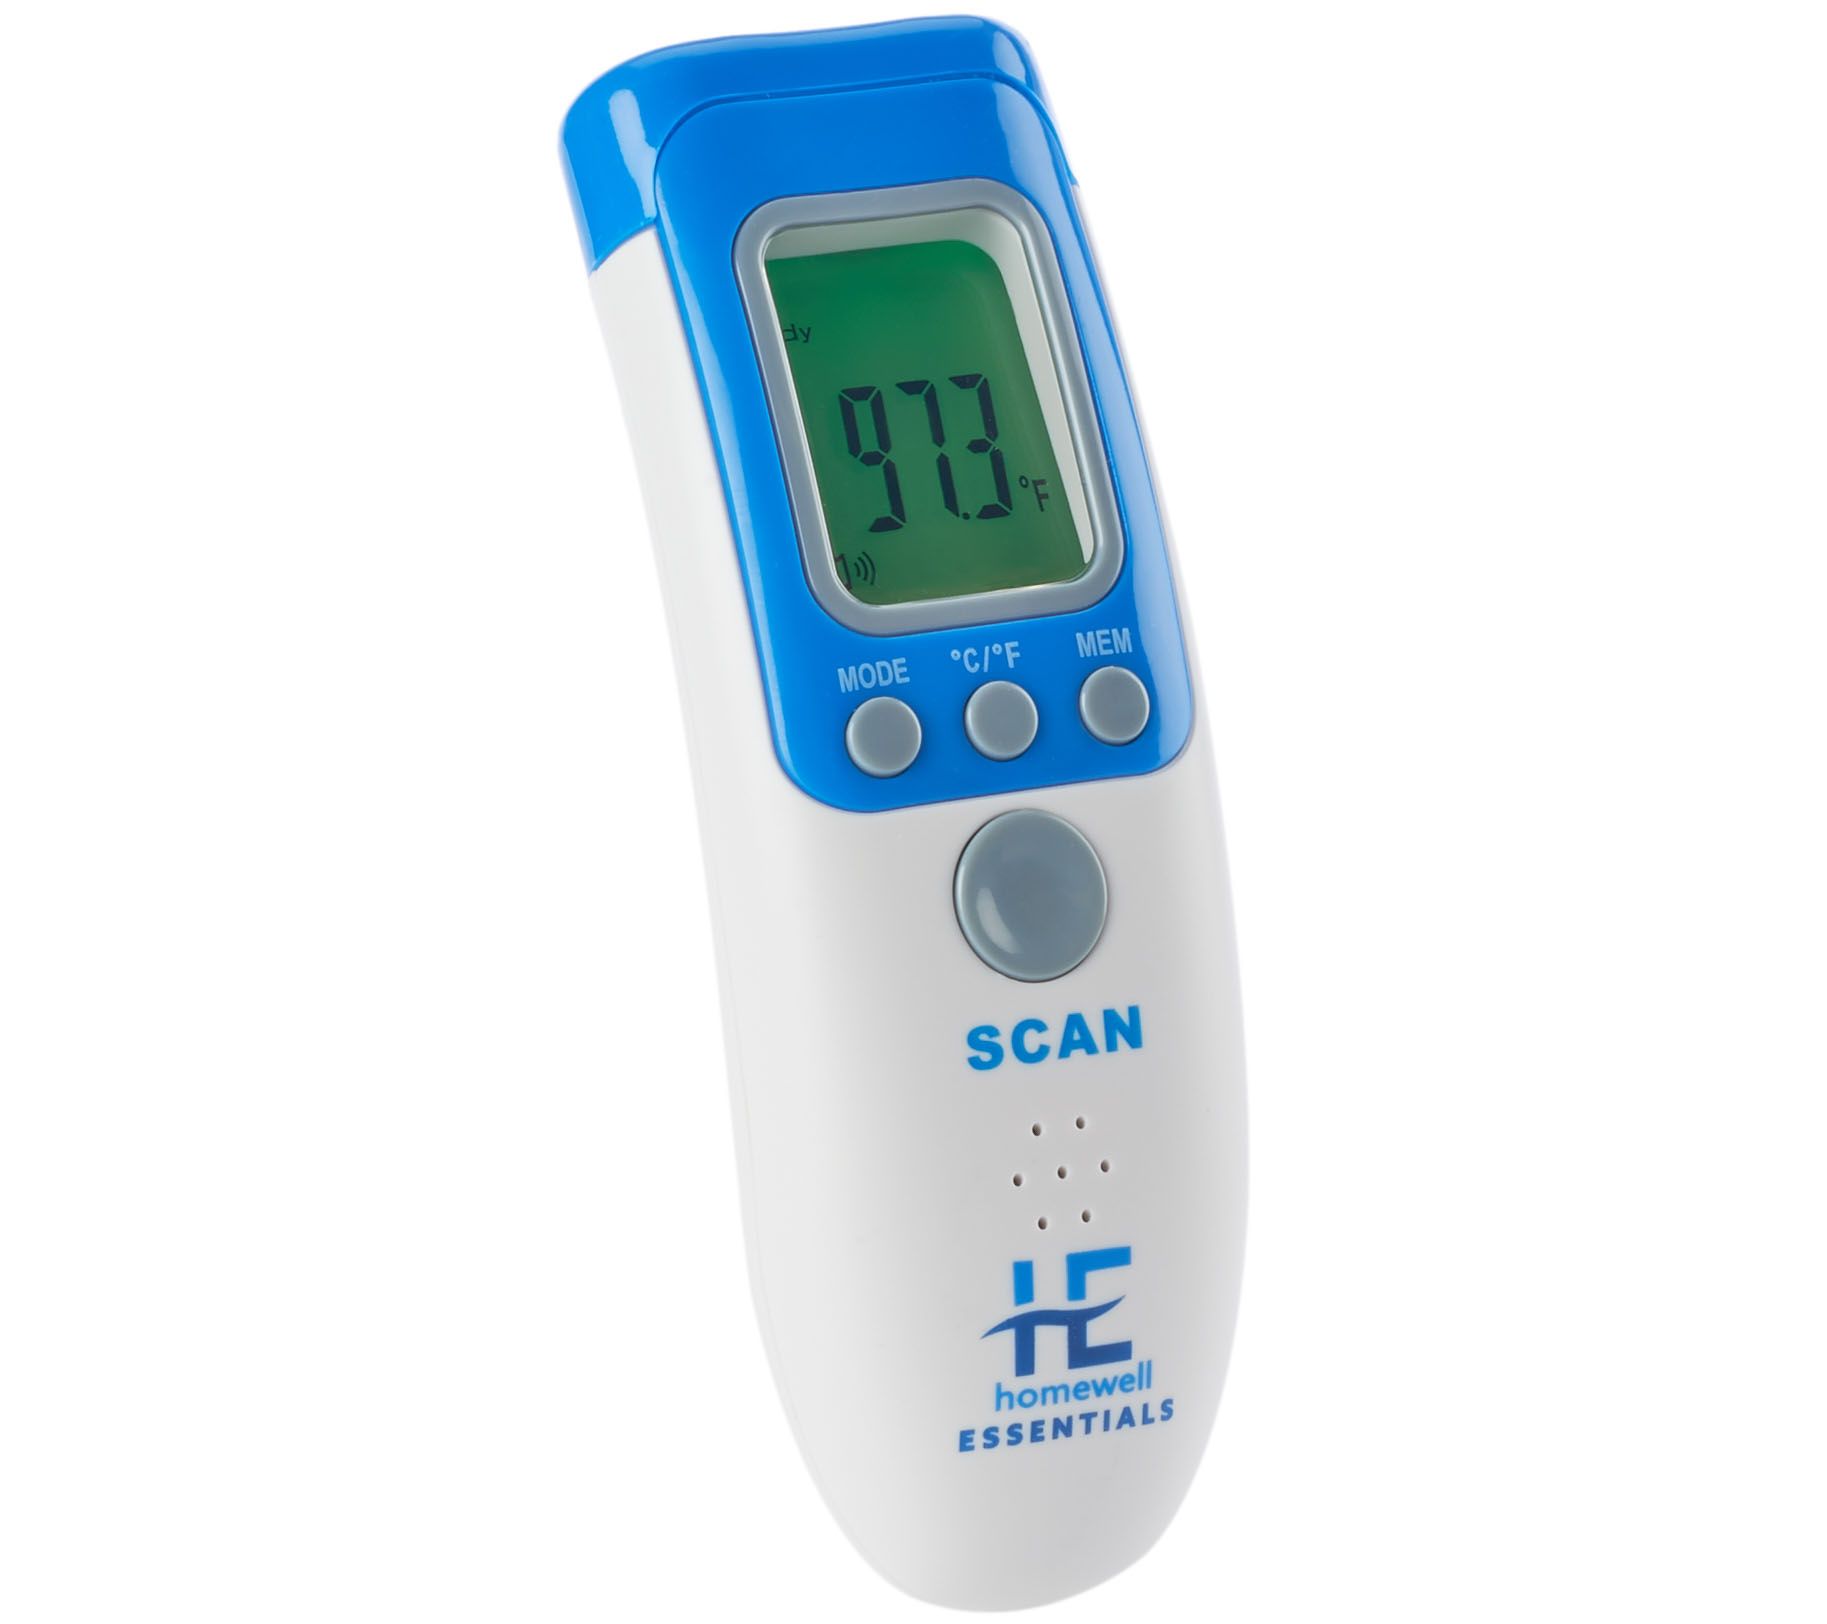 Portable Digital Thermometer for Travel Compact Design Accurate Readings